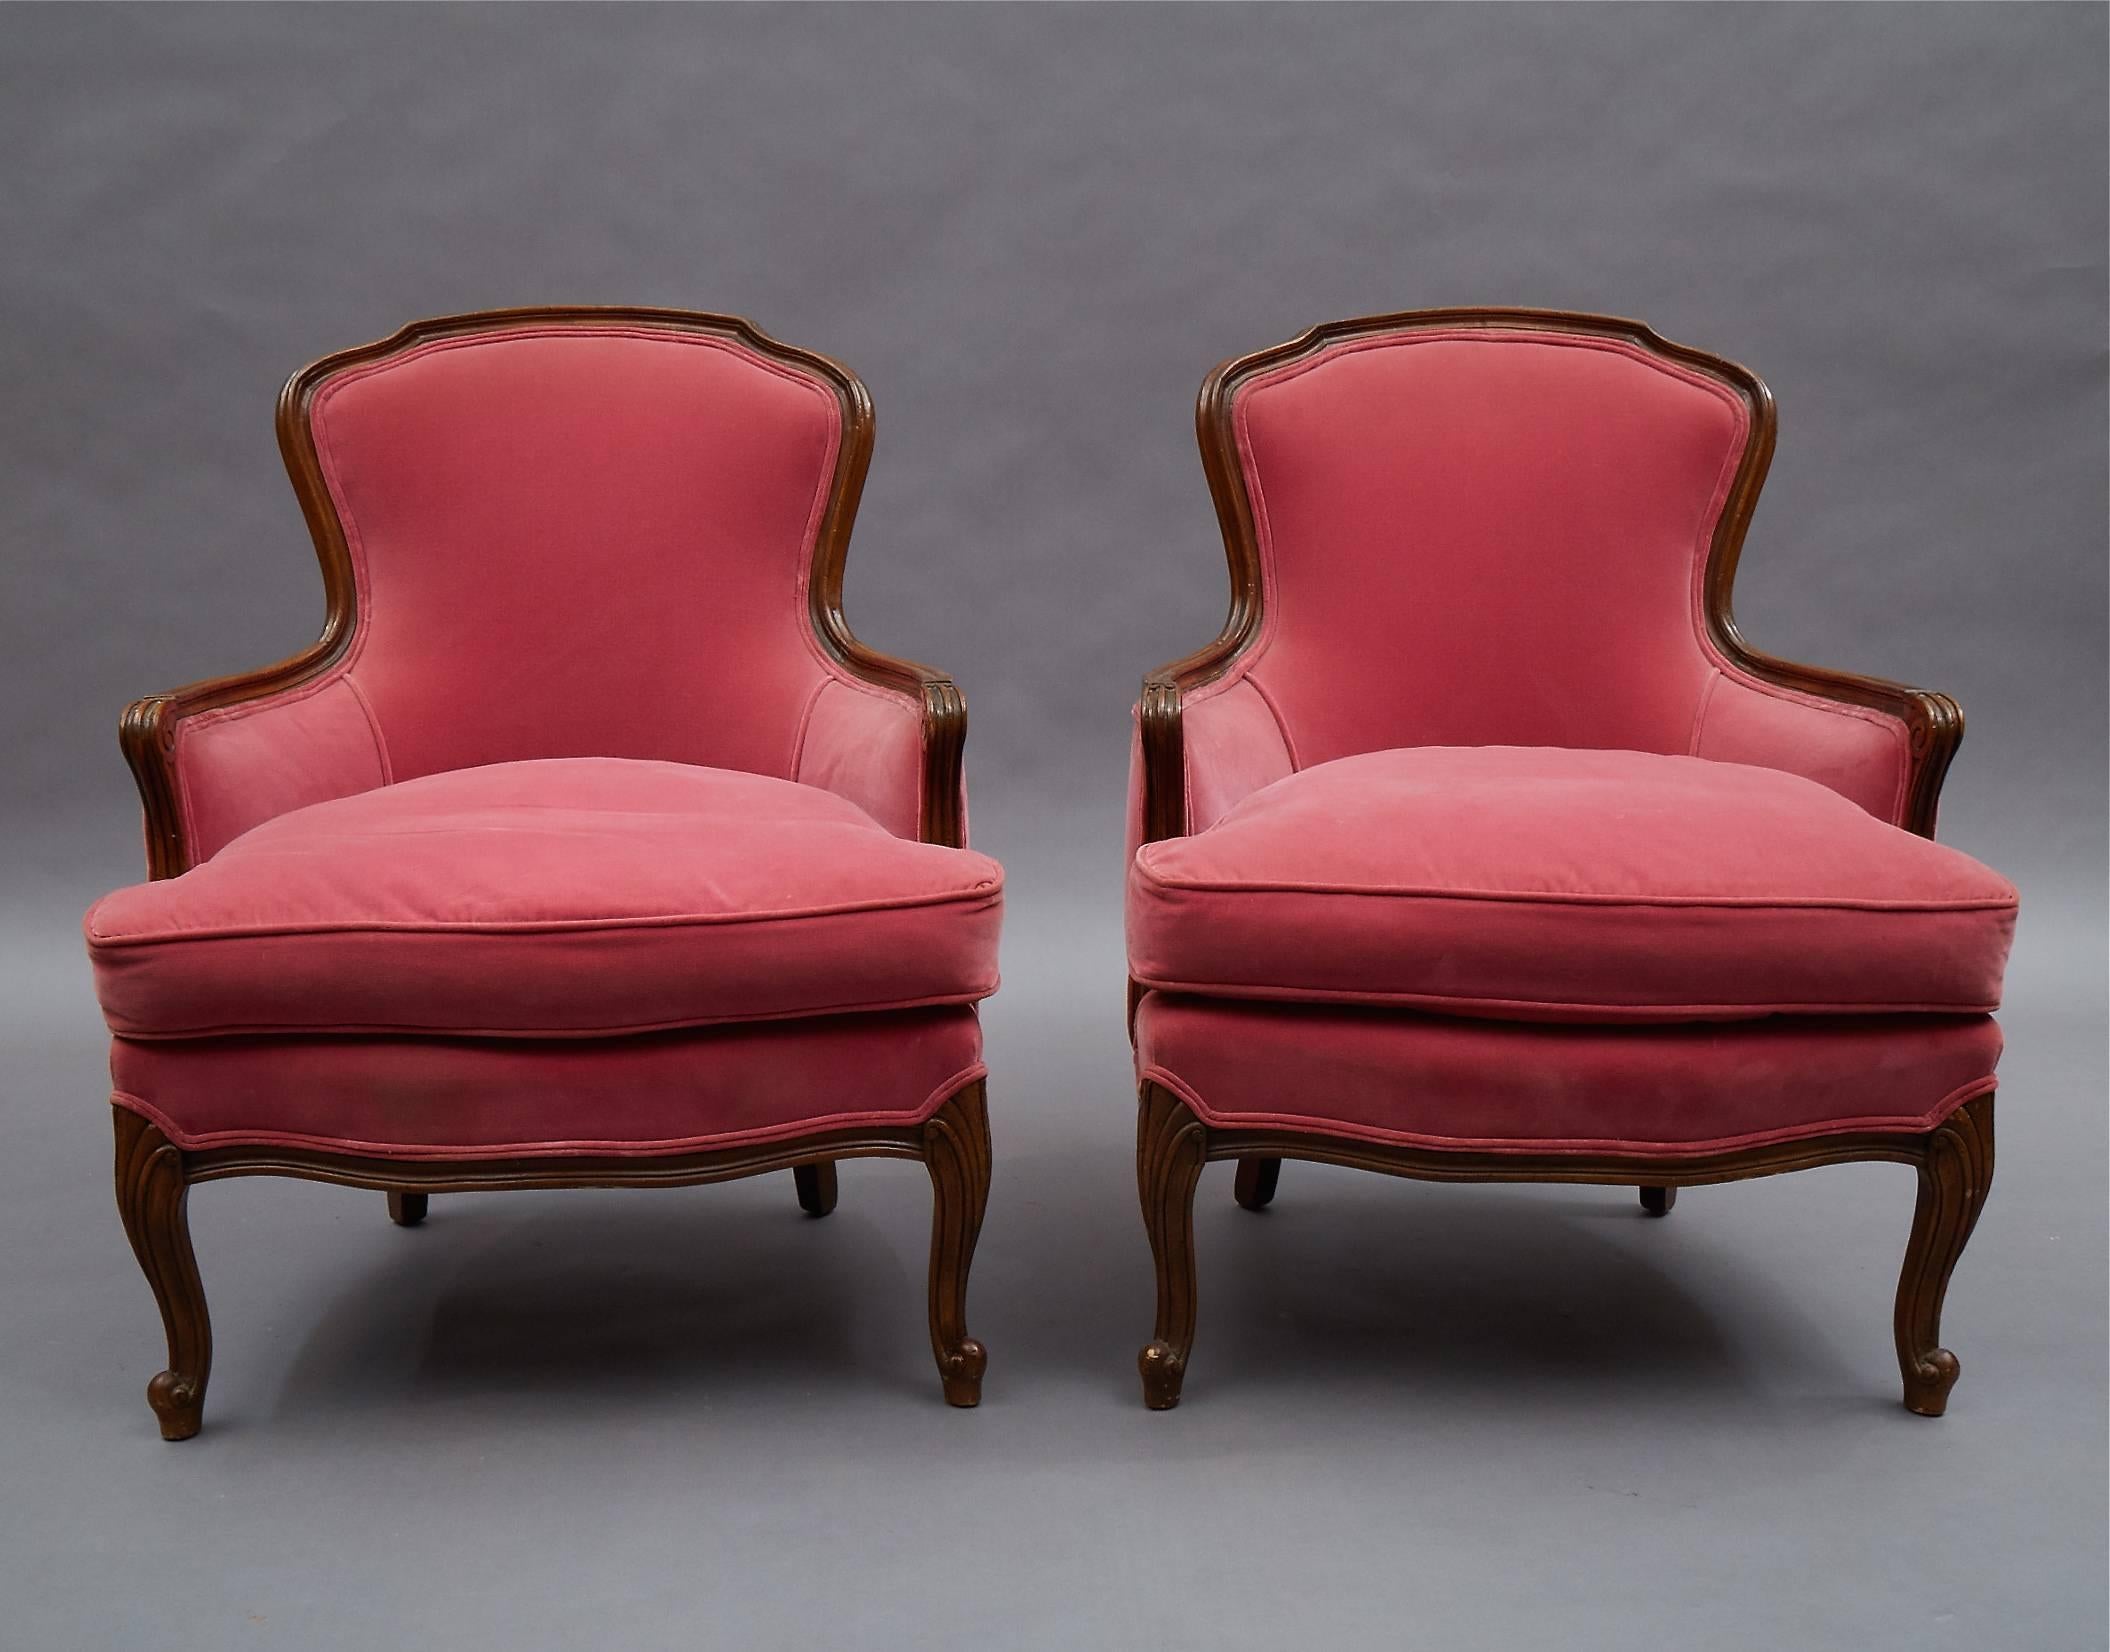 Pair of Victorian or Louis XVI style Bergère chairs feature carved mahogany frames and raspberry velvet upholstery, circa 1940s.